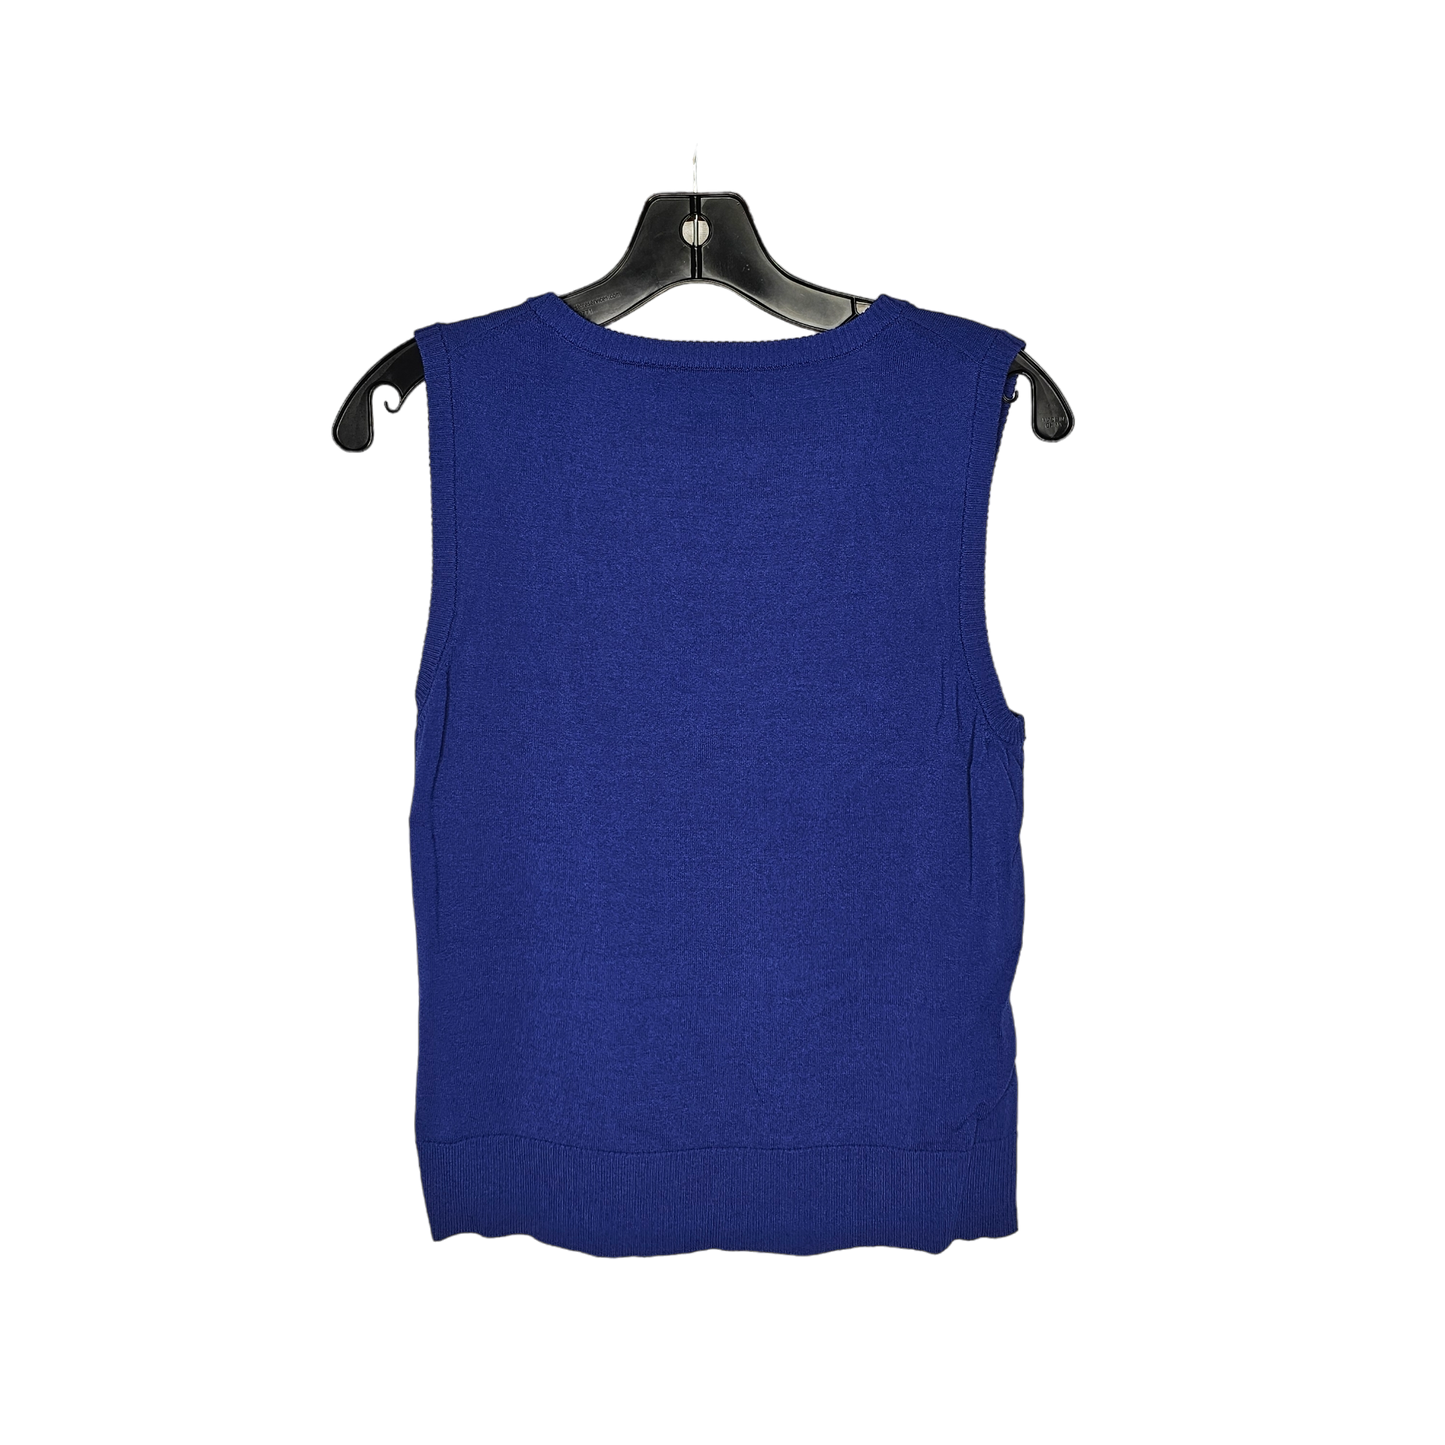 Top Sleeveless By Cable And Gauge  Size: L